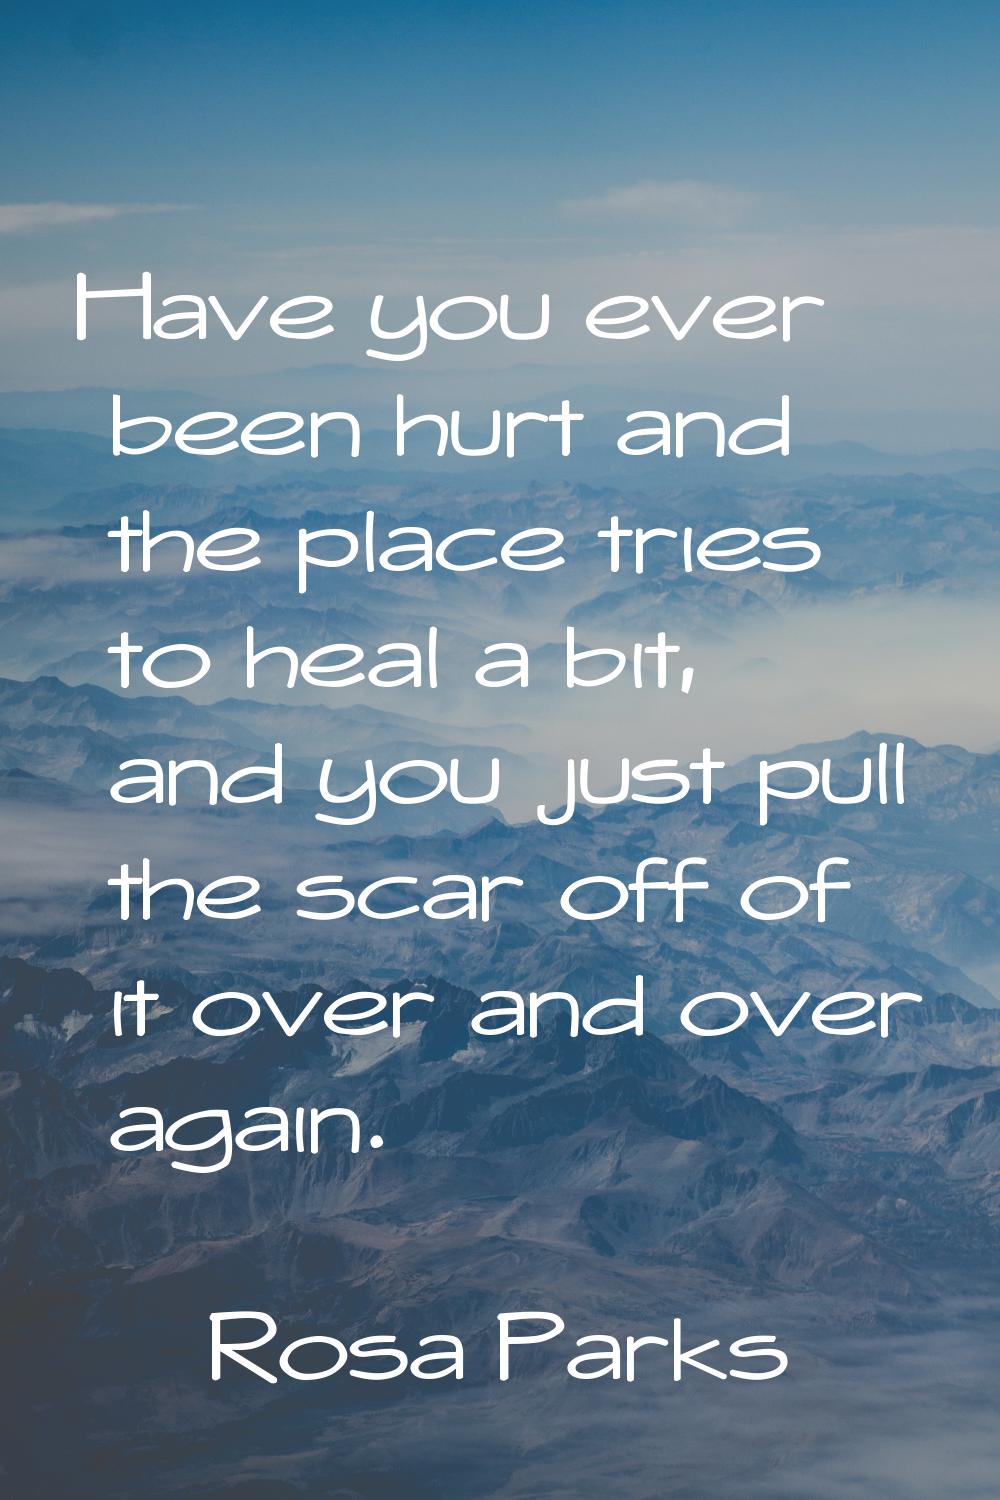 Have you ever been hurt and the place tries to heal a bit, and you just pull the scar off of it ove